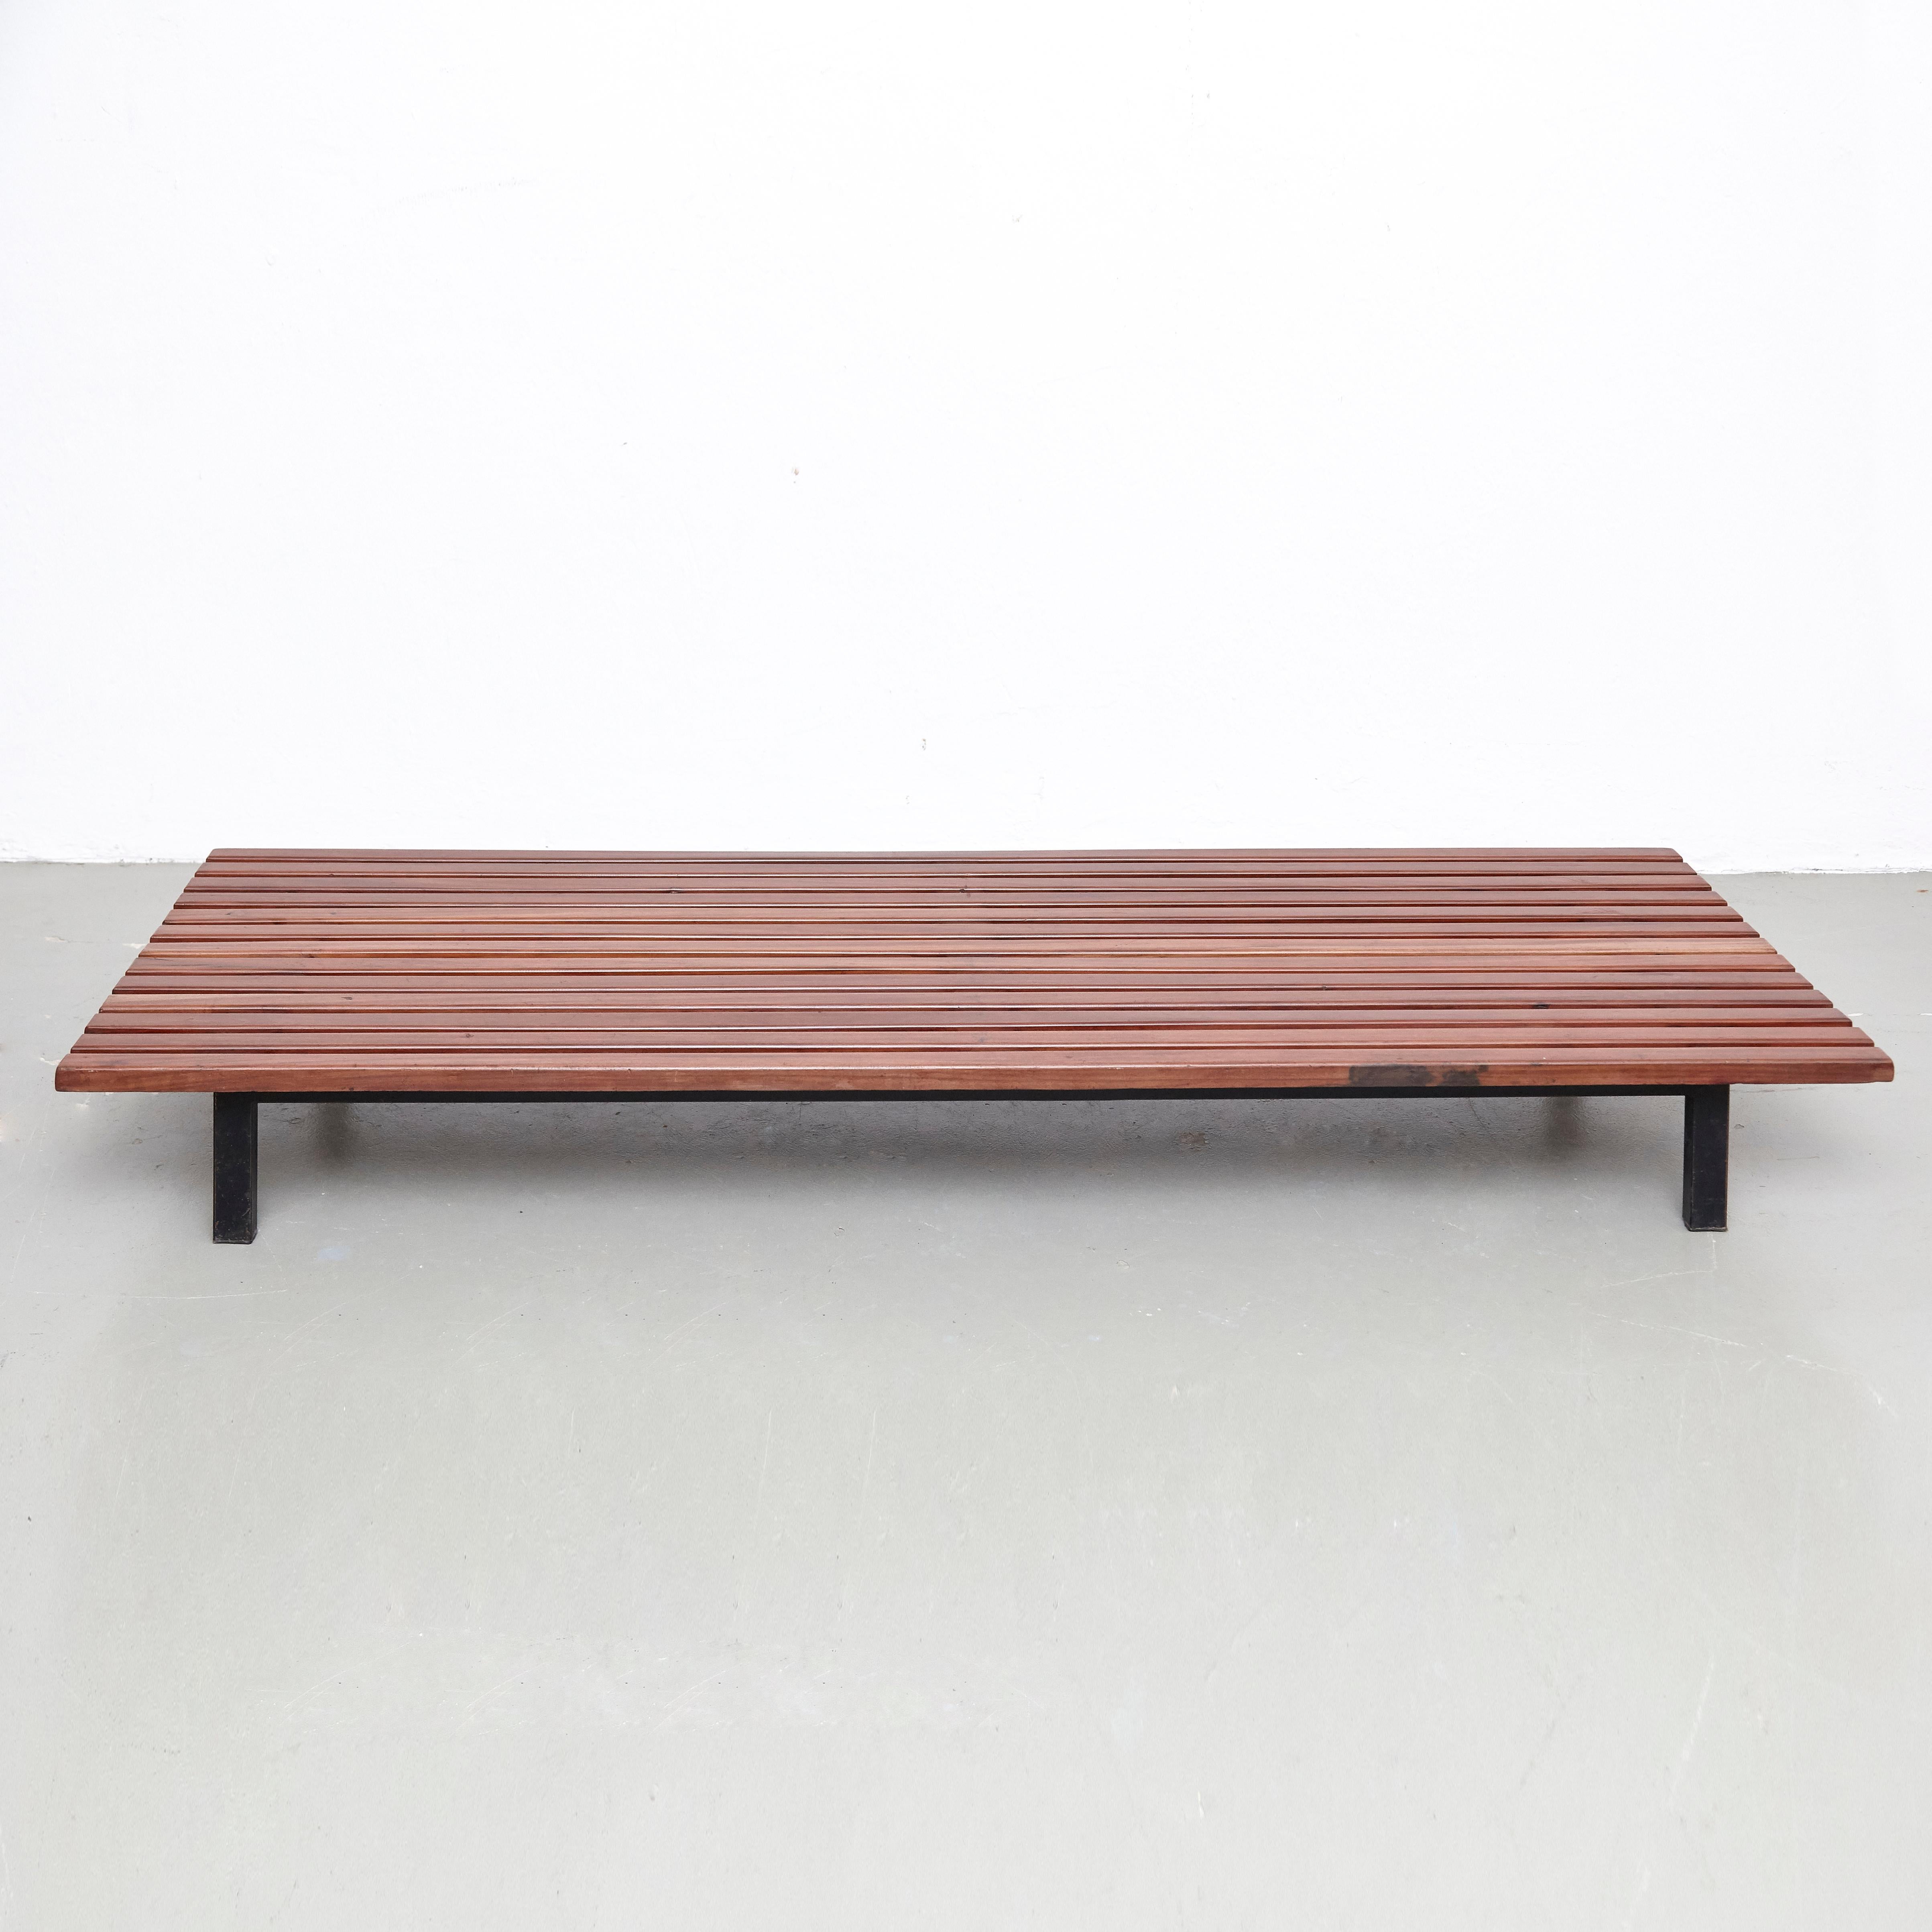 Bench designed by Charlotte Perriand, circa 1950.
Manufactured by Steph Simon, (France), circa 1950.
Wood, lacquered metal frame and legs.

Provenance: Cansado, Mauritania (Africa).

In original condition, with minor wear consistent with age and